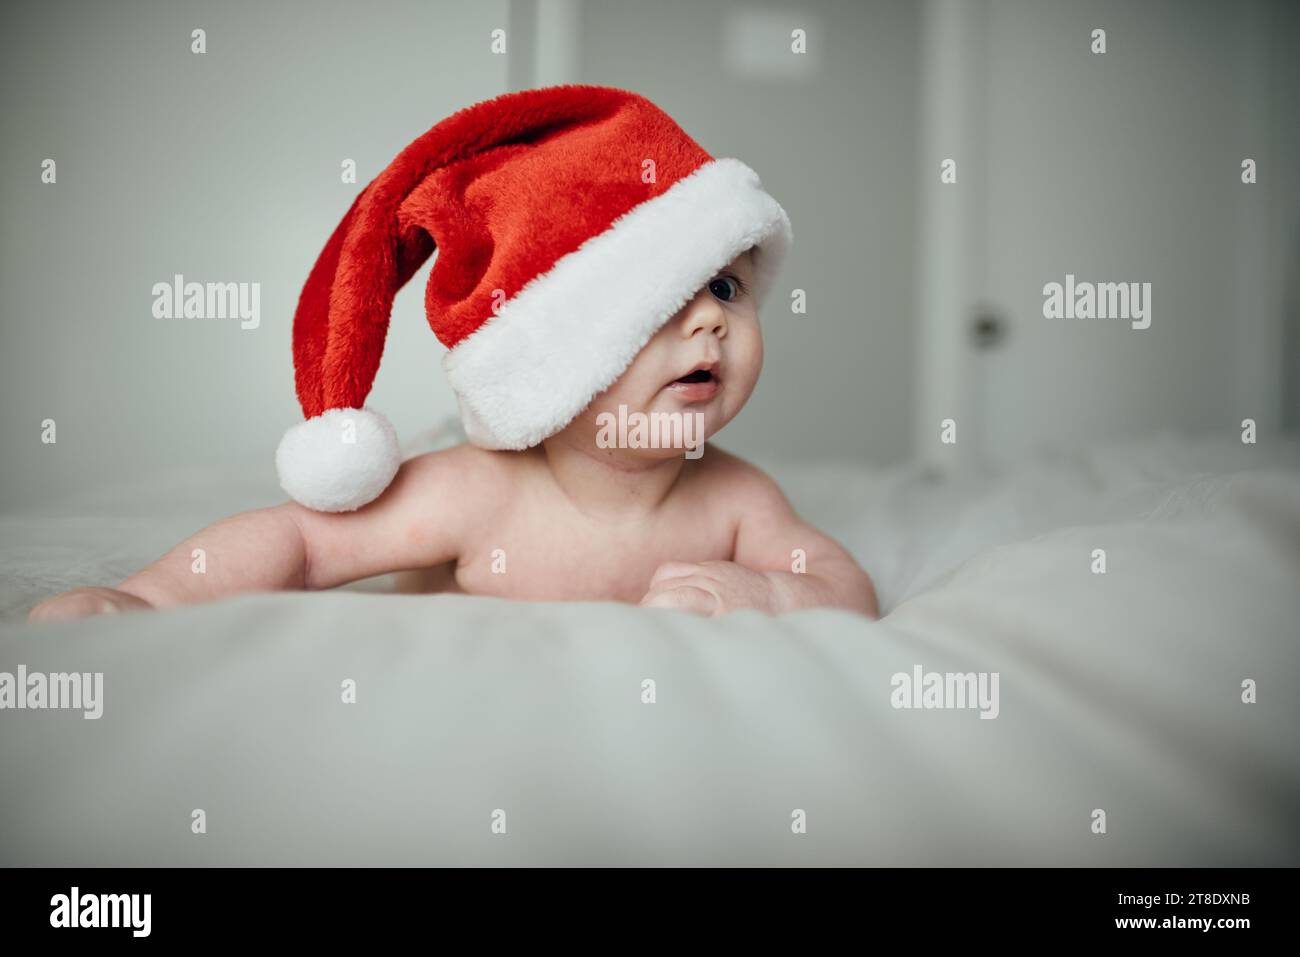 Close up of baby boy wearing christmas Santa hat falling over on Stock Photo